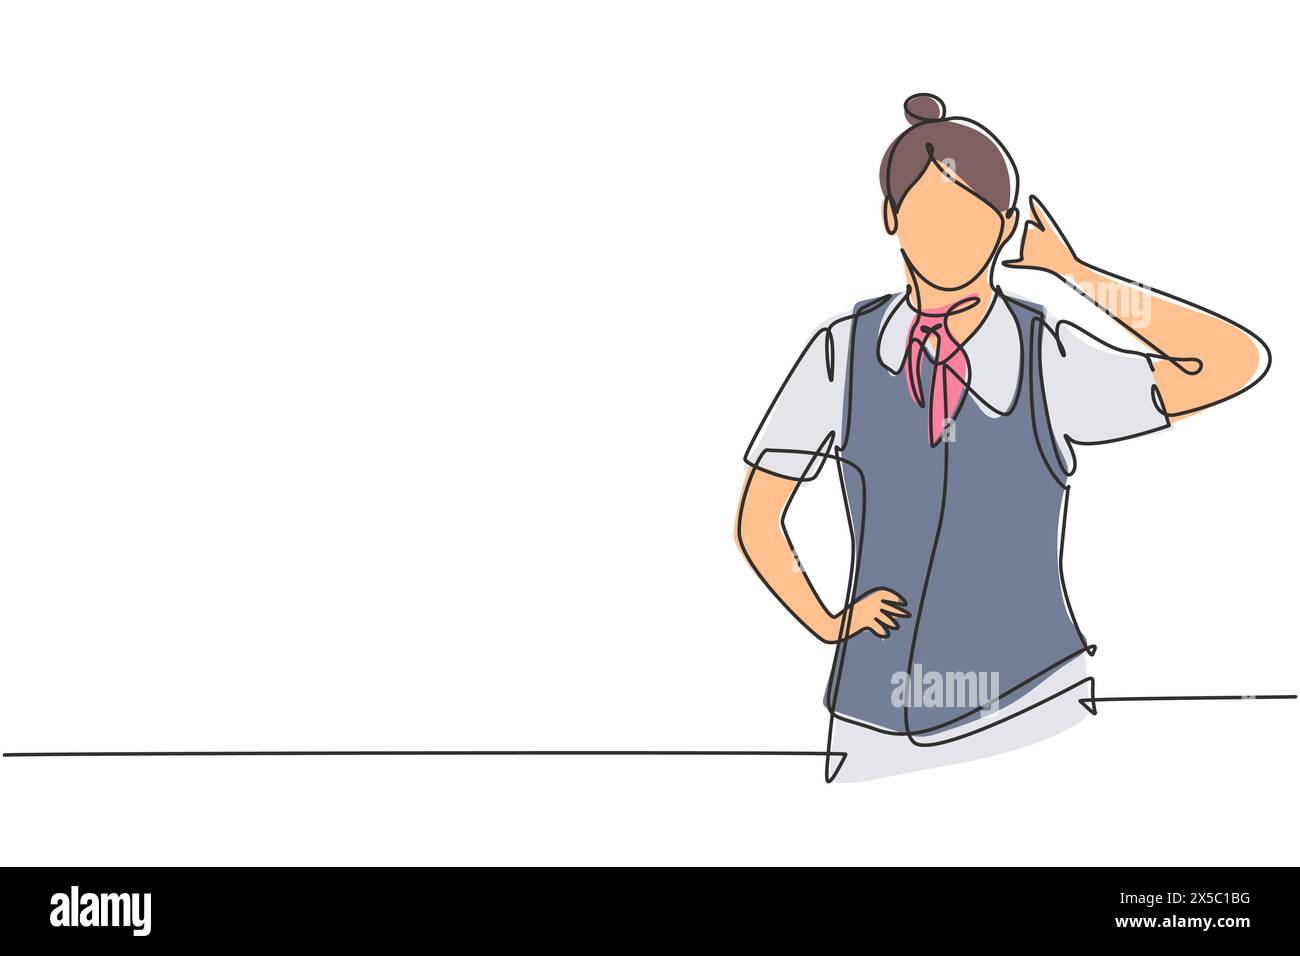 Single one line drawing flight attendant with call me gesture ready to serve airplane passengers in a friendly and warm manner. Success person. Contin Stock Vector